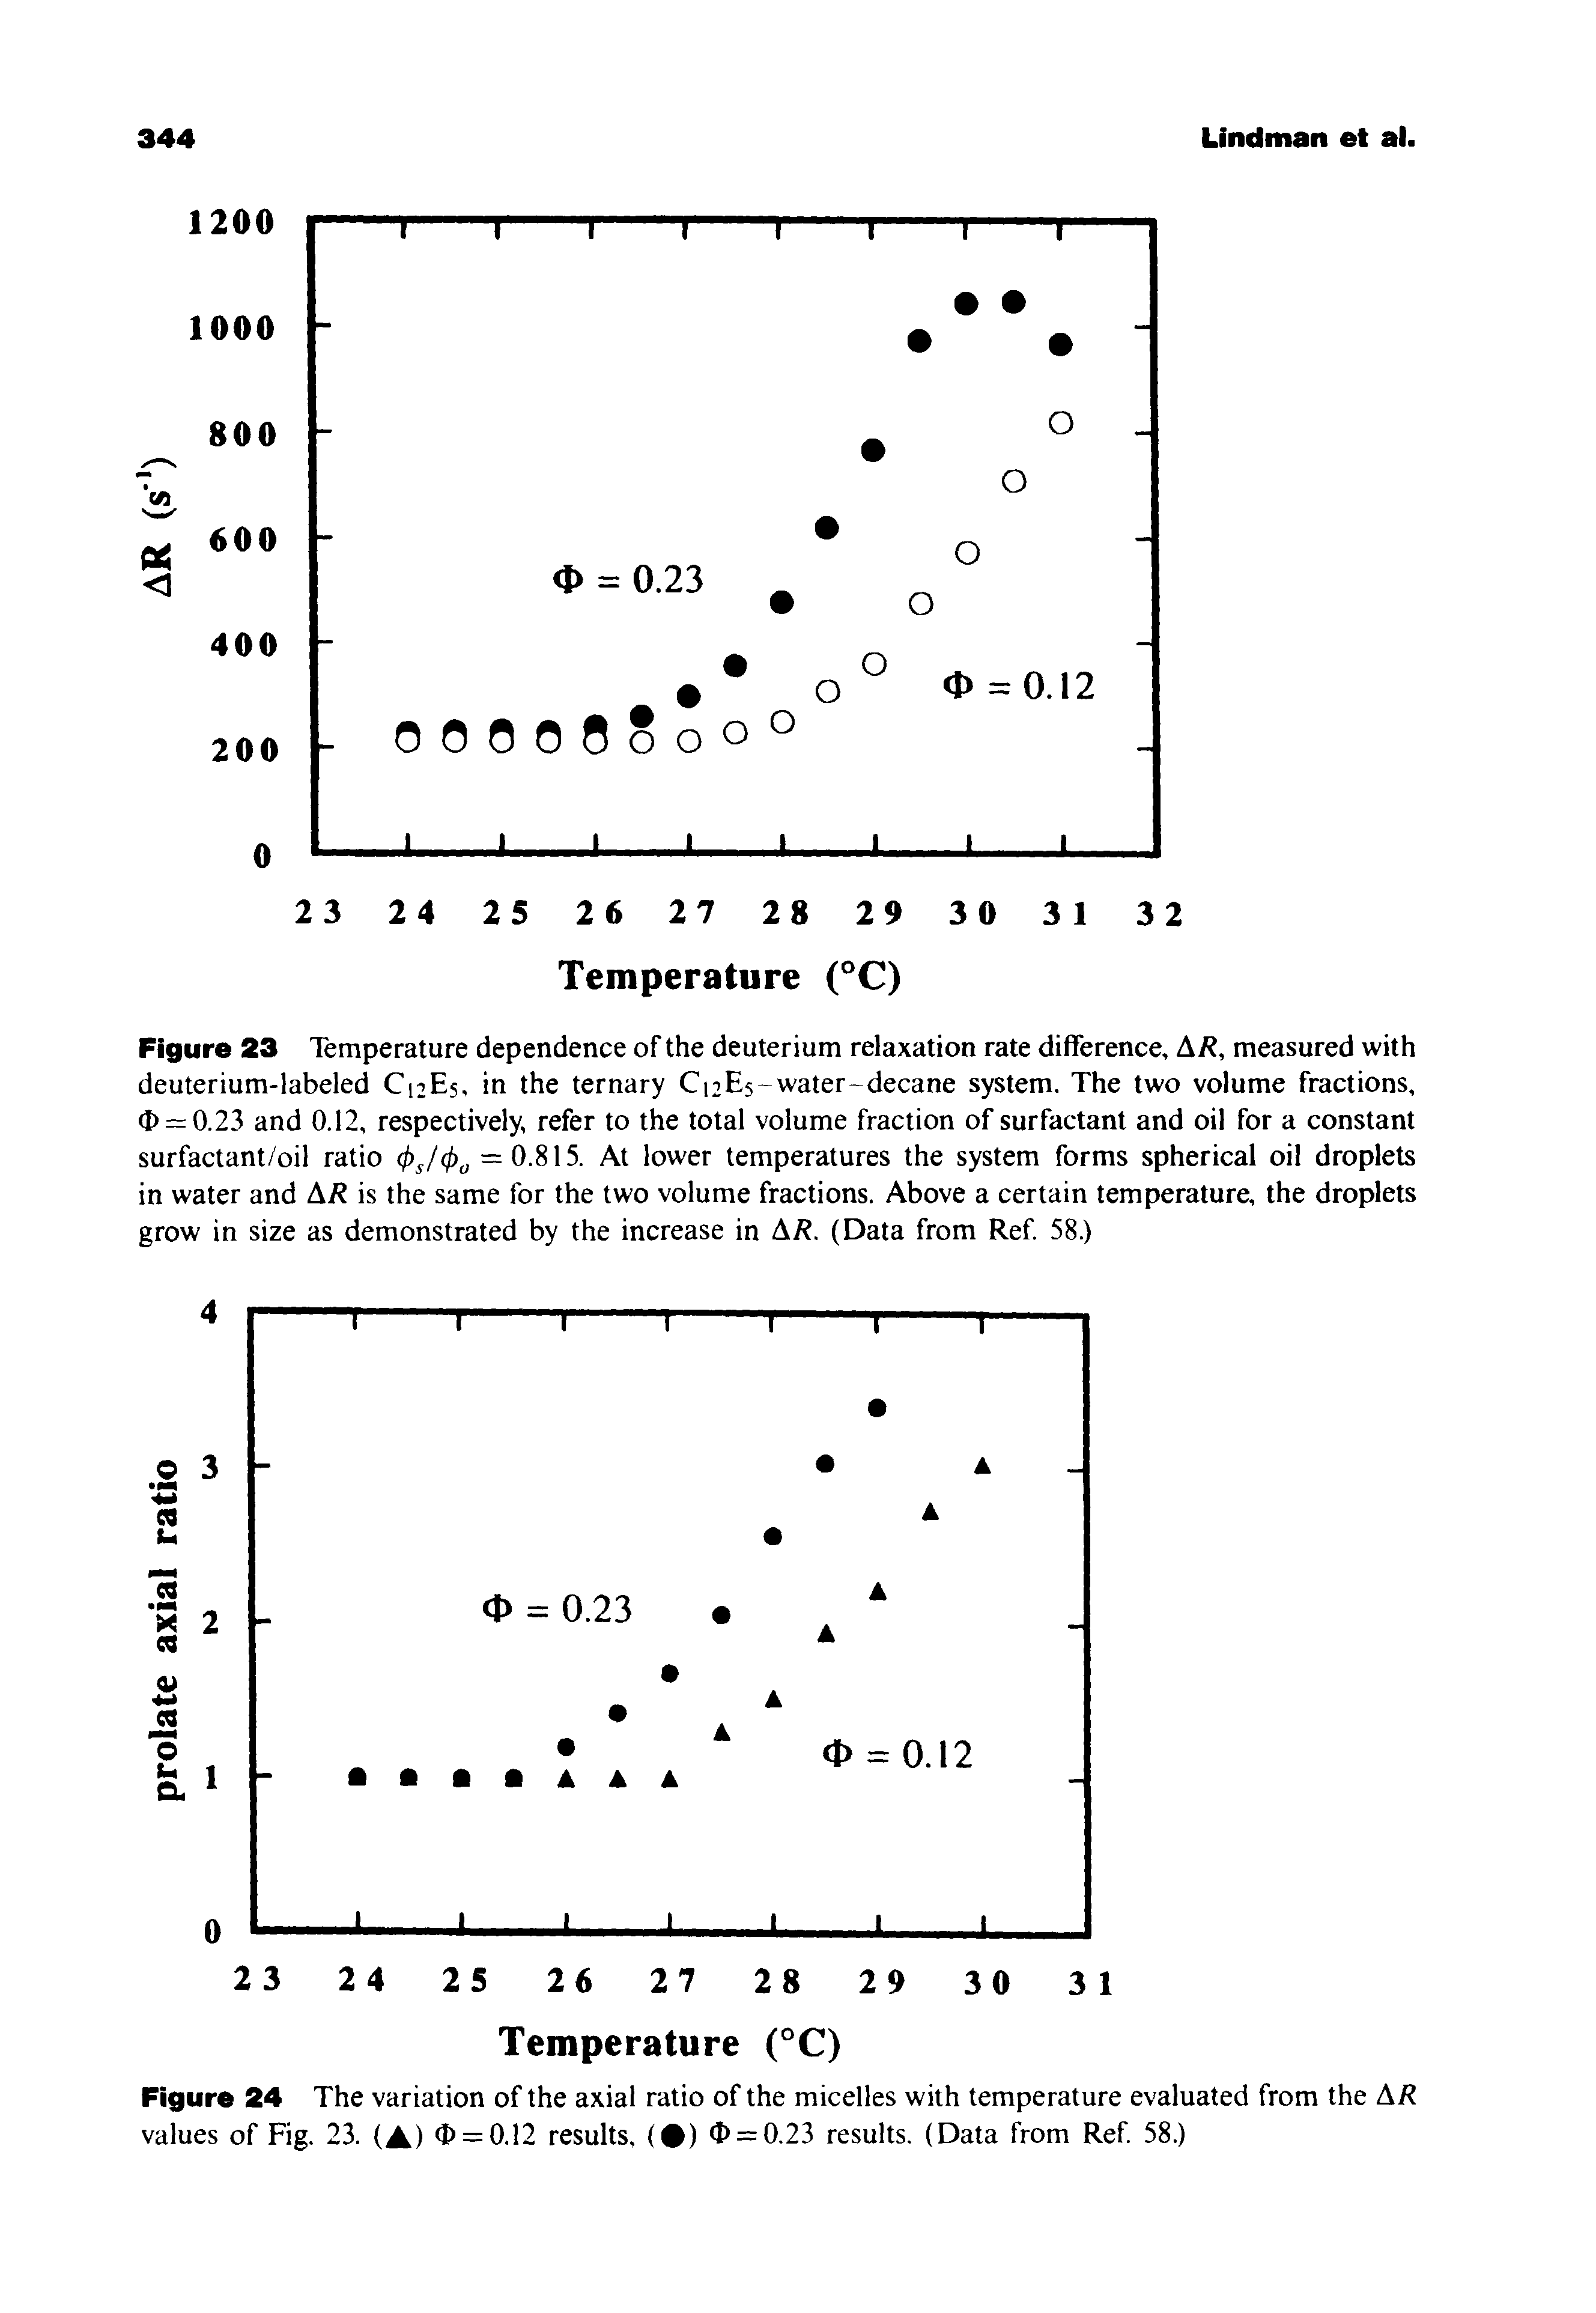 Figure 23 Temperature dependence of the deuterium relaxation rate difference. A/ , measured with deuterium-labeled C12E5, in the ternary C12E5-water-decane system. The two volume fractions, (1) = 0.23 and 0.12, respectively, refer to the total volume fraction of surfactant and oil for a constant surfactant/oil ratio 0 /0 = 0.815. At lower temperatures the system forms spherical oil droplets in water and AR is the same for the two volume fractions. Above a certain temperature, the droplets grow in size as demonstrated by the increase in AR. (Data from Ref. 58.)...